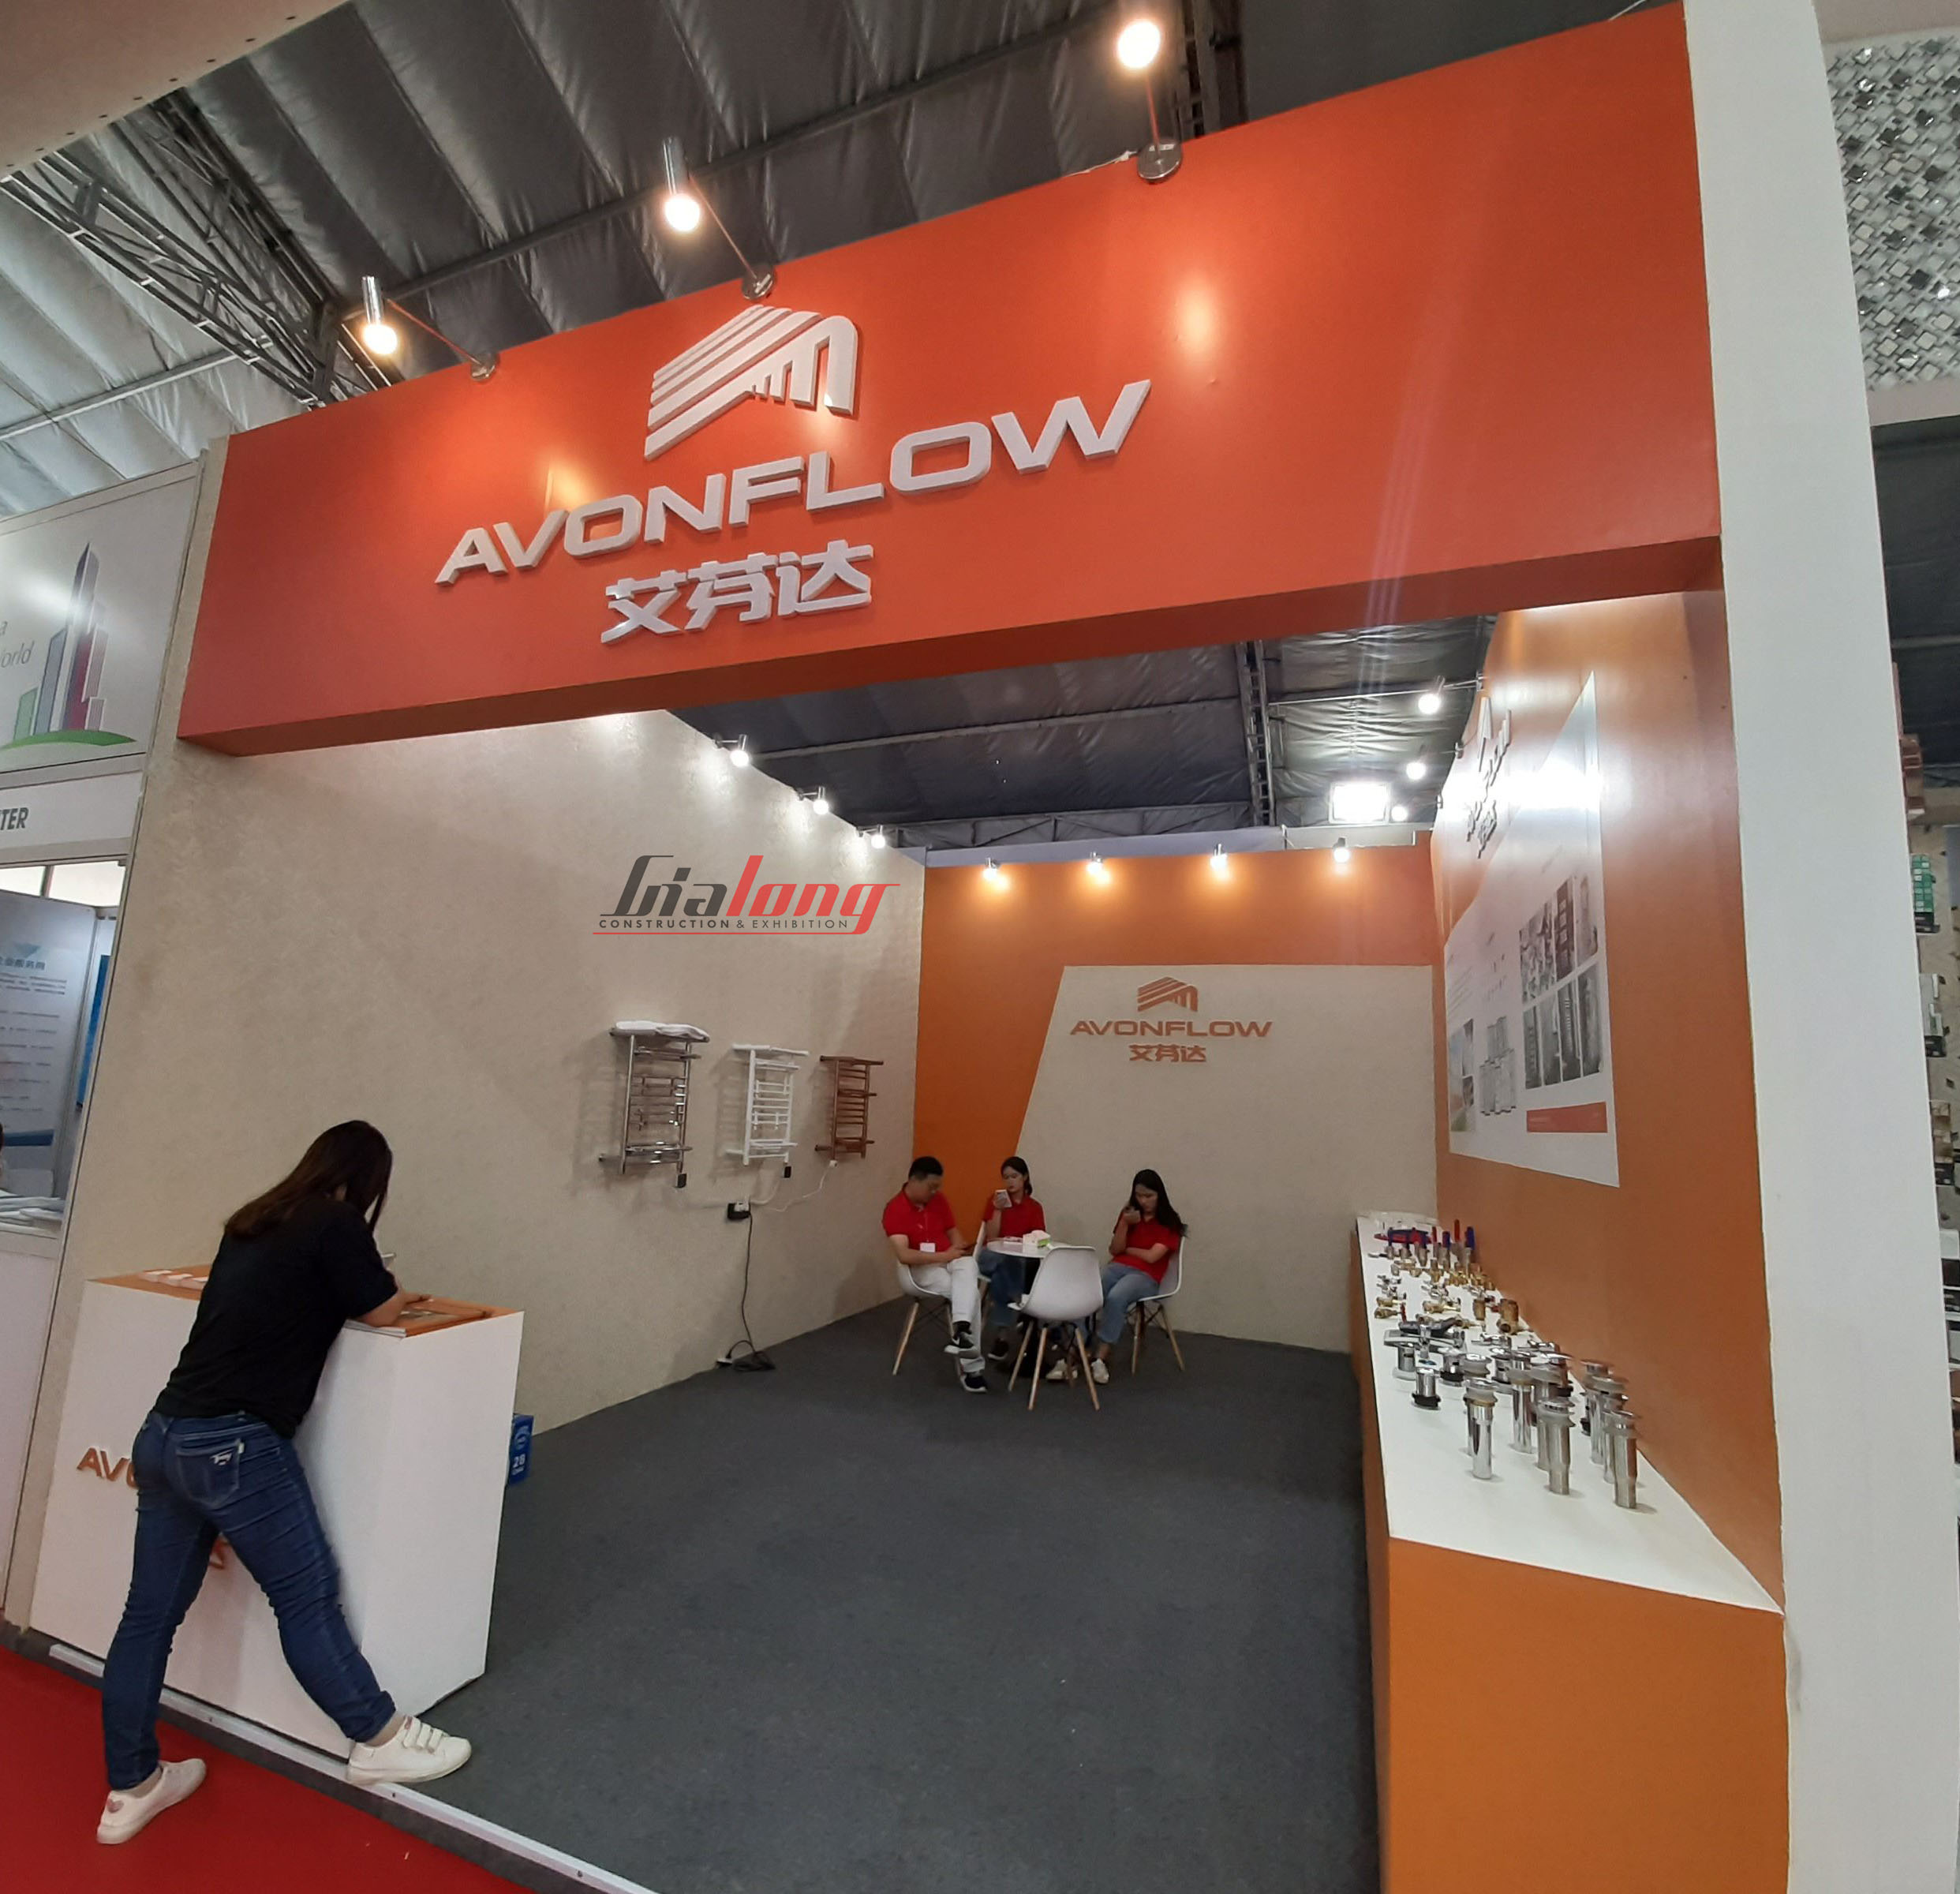 The stand of Avonflow was designed and constructed by Gia Log